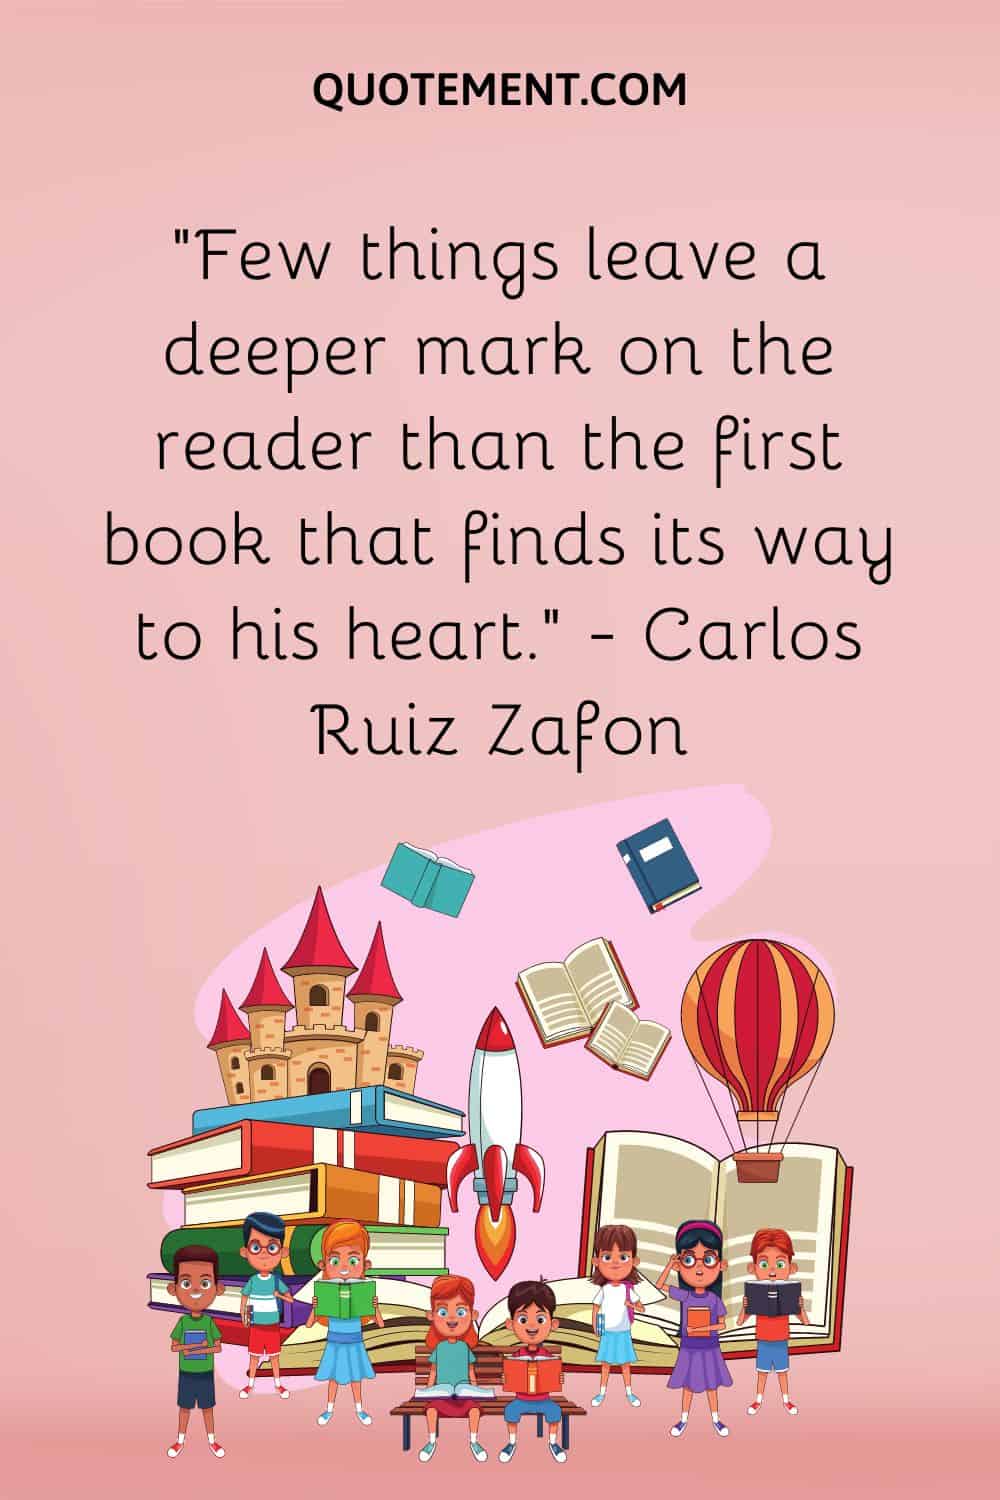 “Few things leave a deeper mark on the reader than the first book that finds its way to his heart.” — Carlos Ruiz Zafon